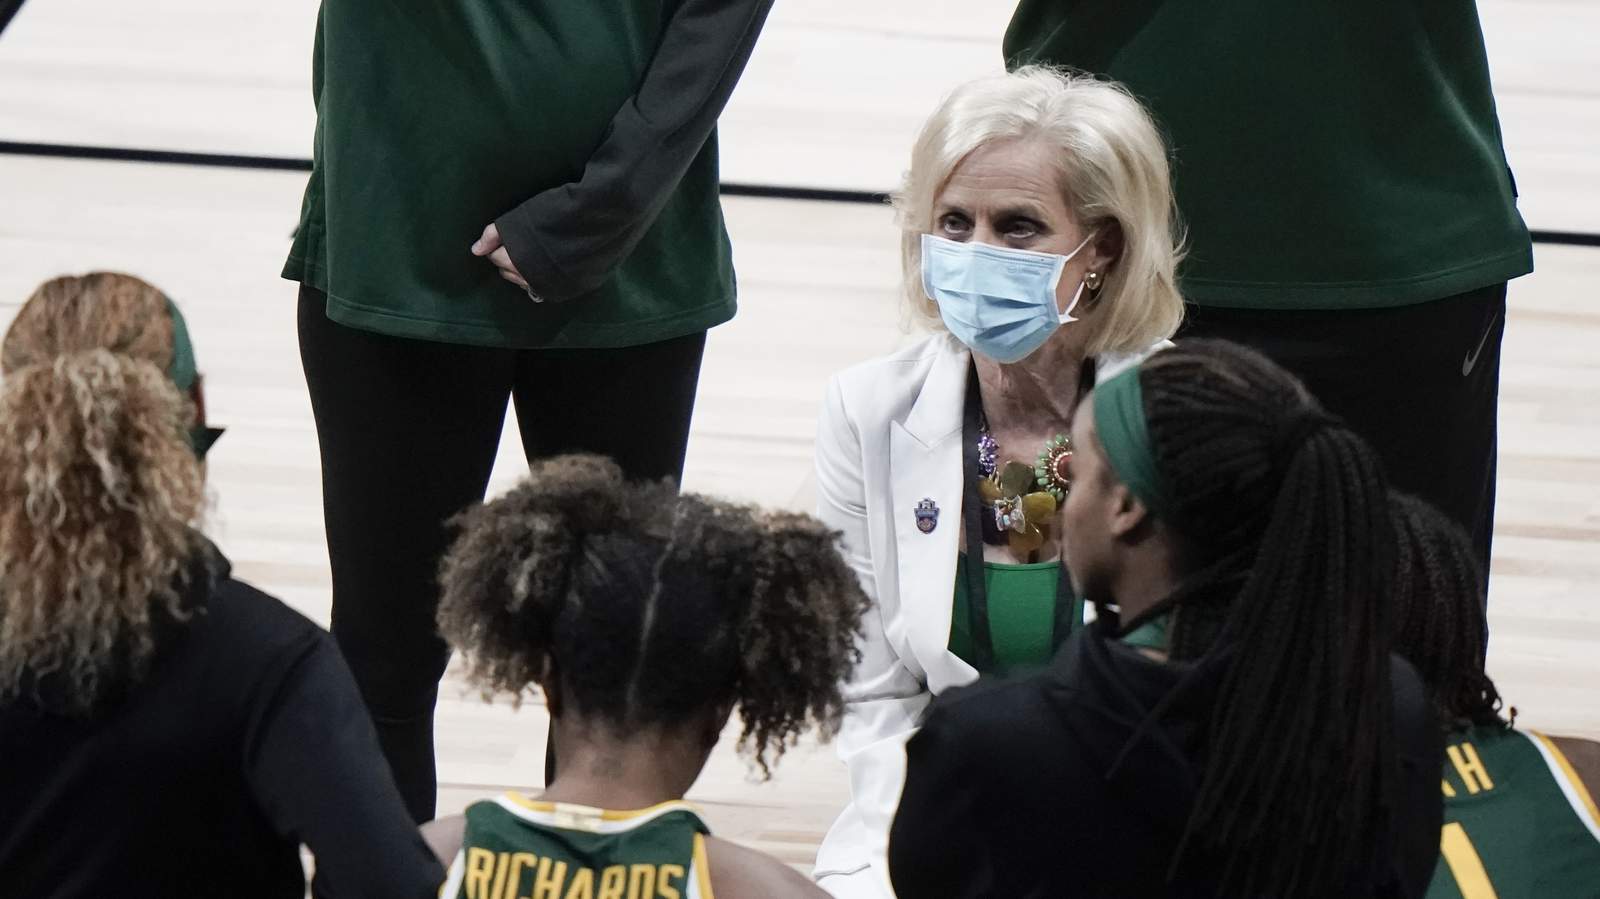 Baylor coach calls for end of COVID-19 testing for Final Four, implies players should participate if they test positive